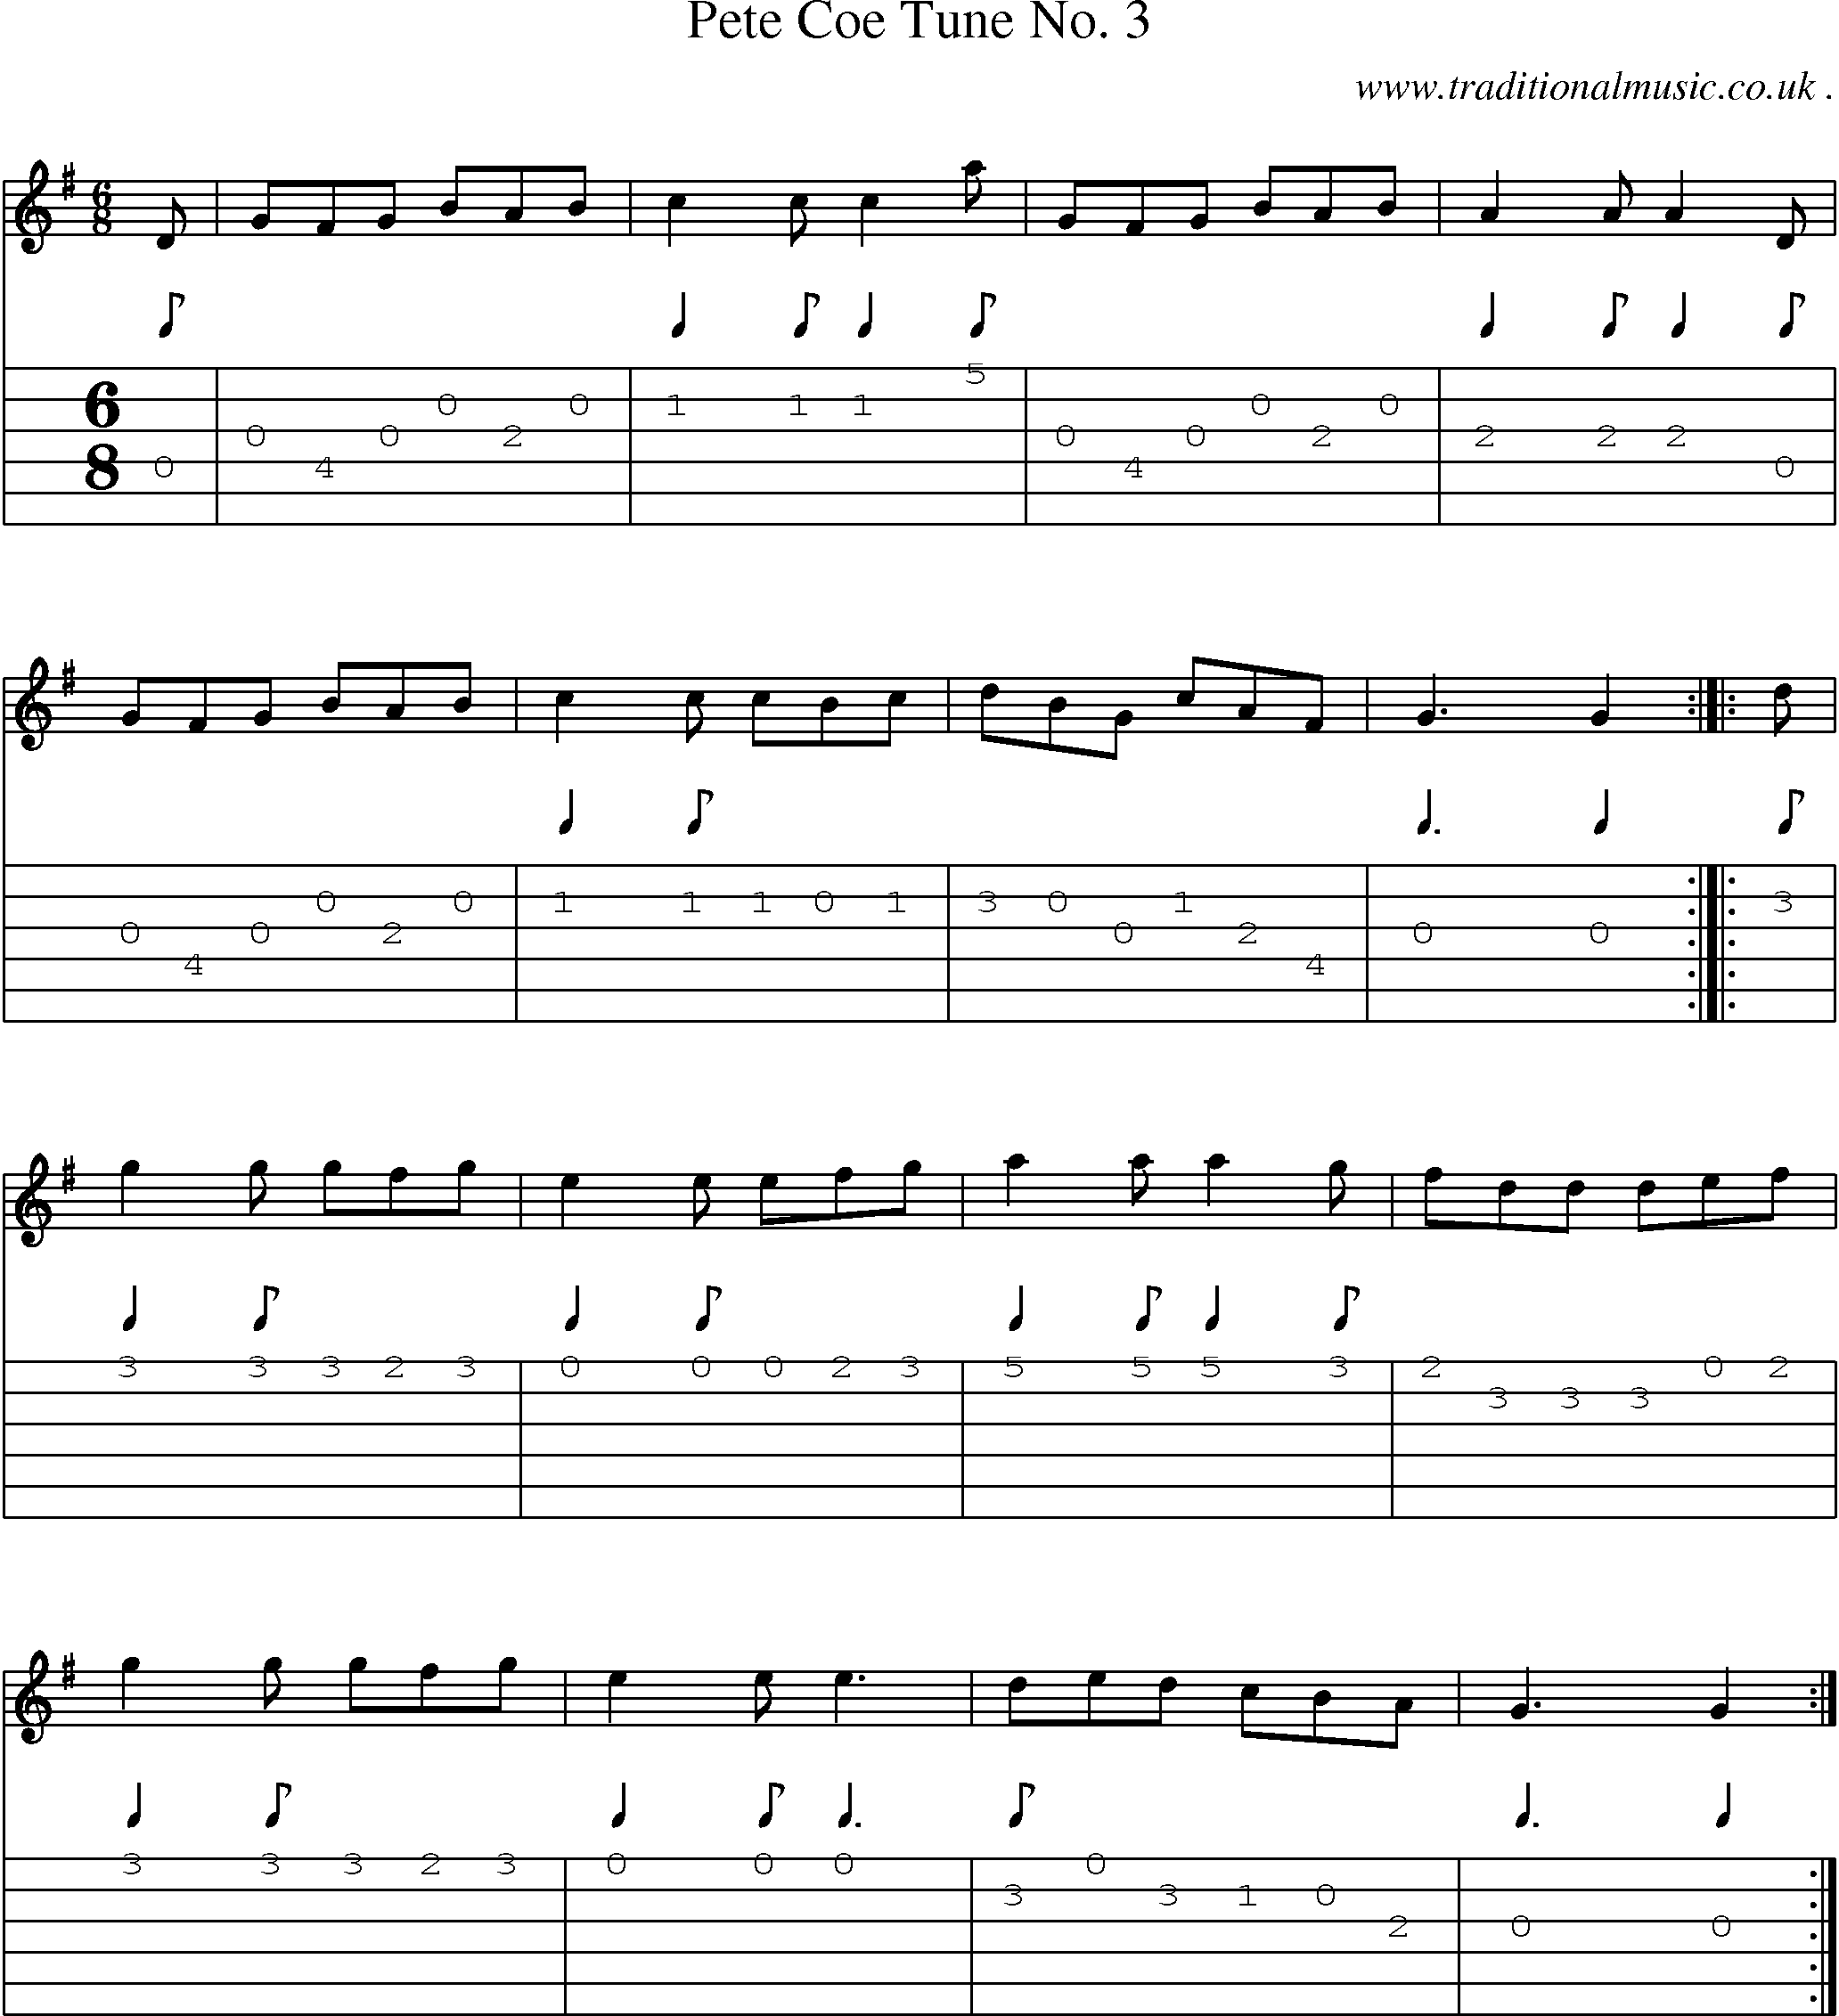 Sheet-Music and Guitar Tabs for Pete Coe Tune No 3